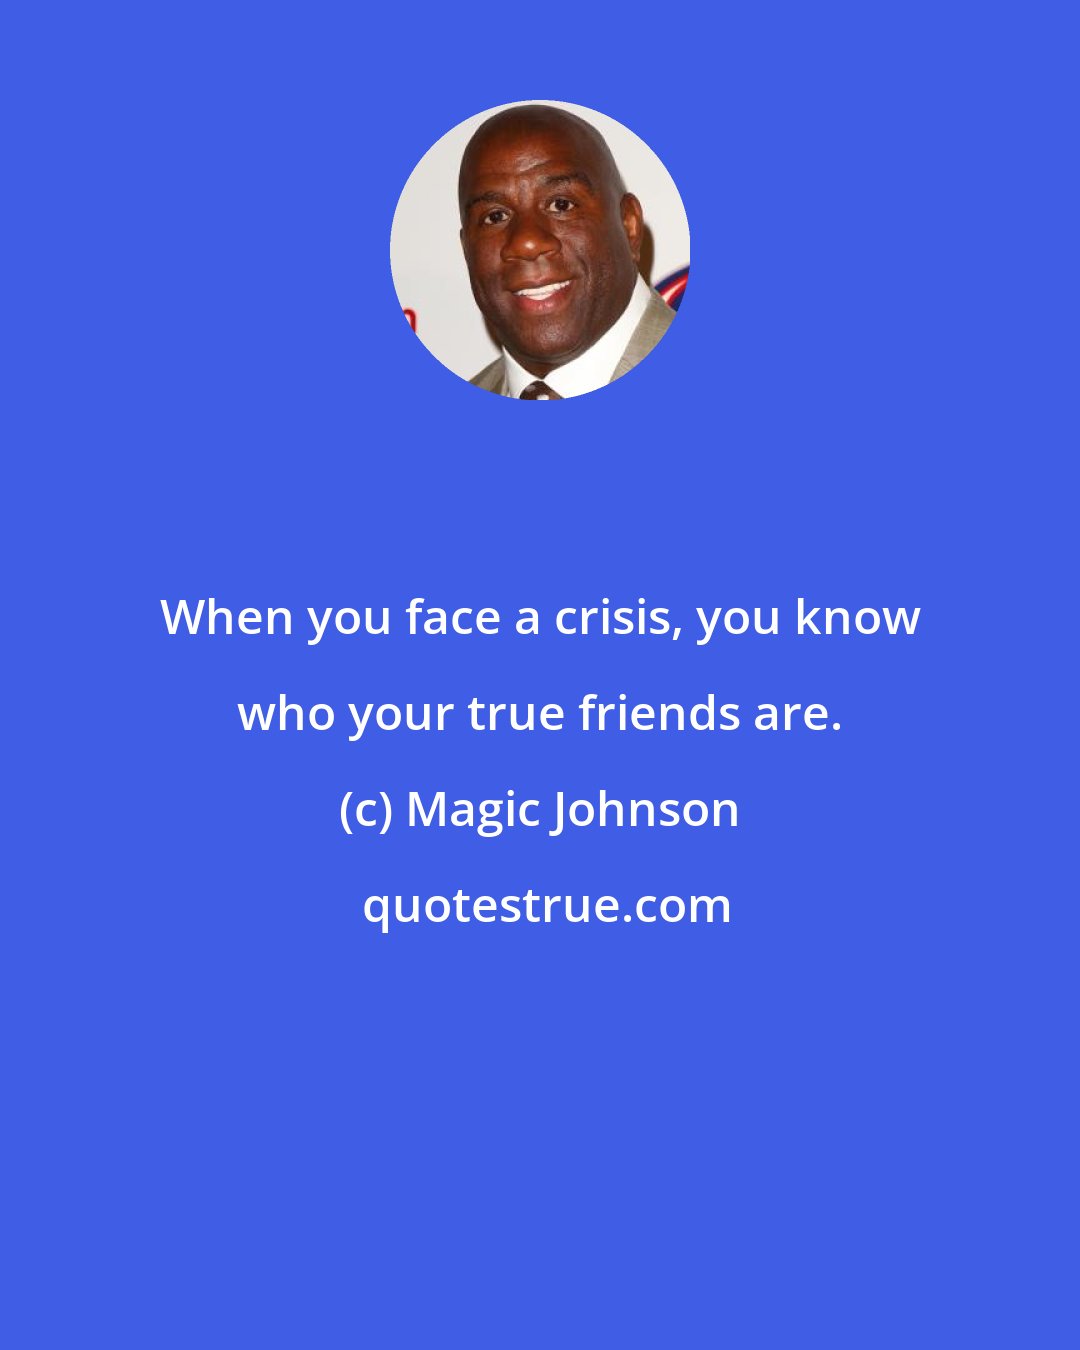 Magic Johnson: When you face a crisis, you know who your true friends are.